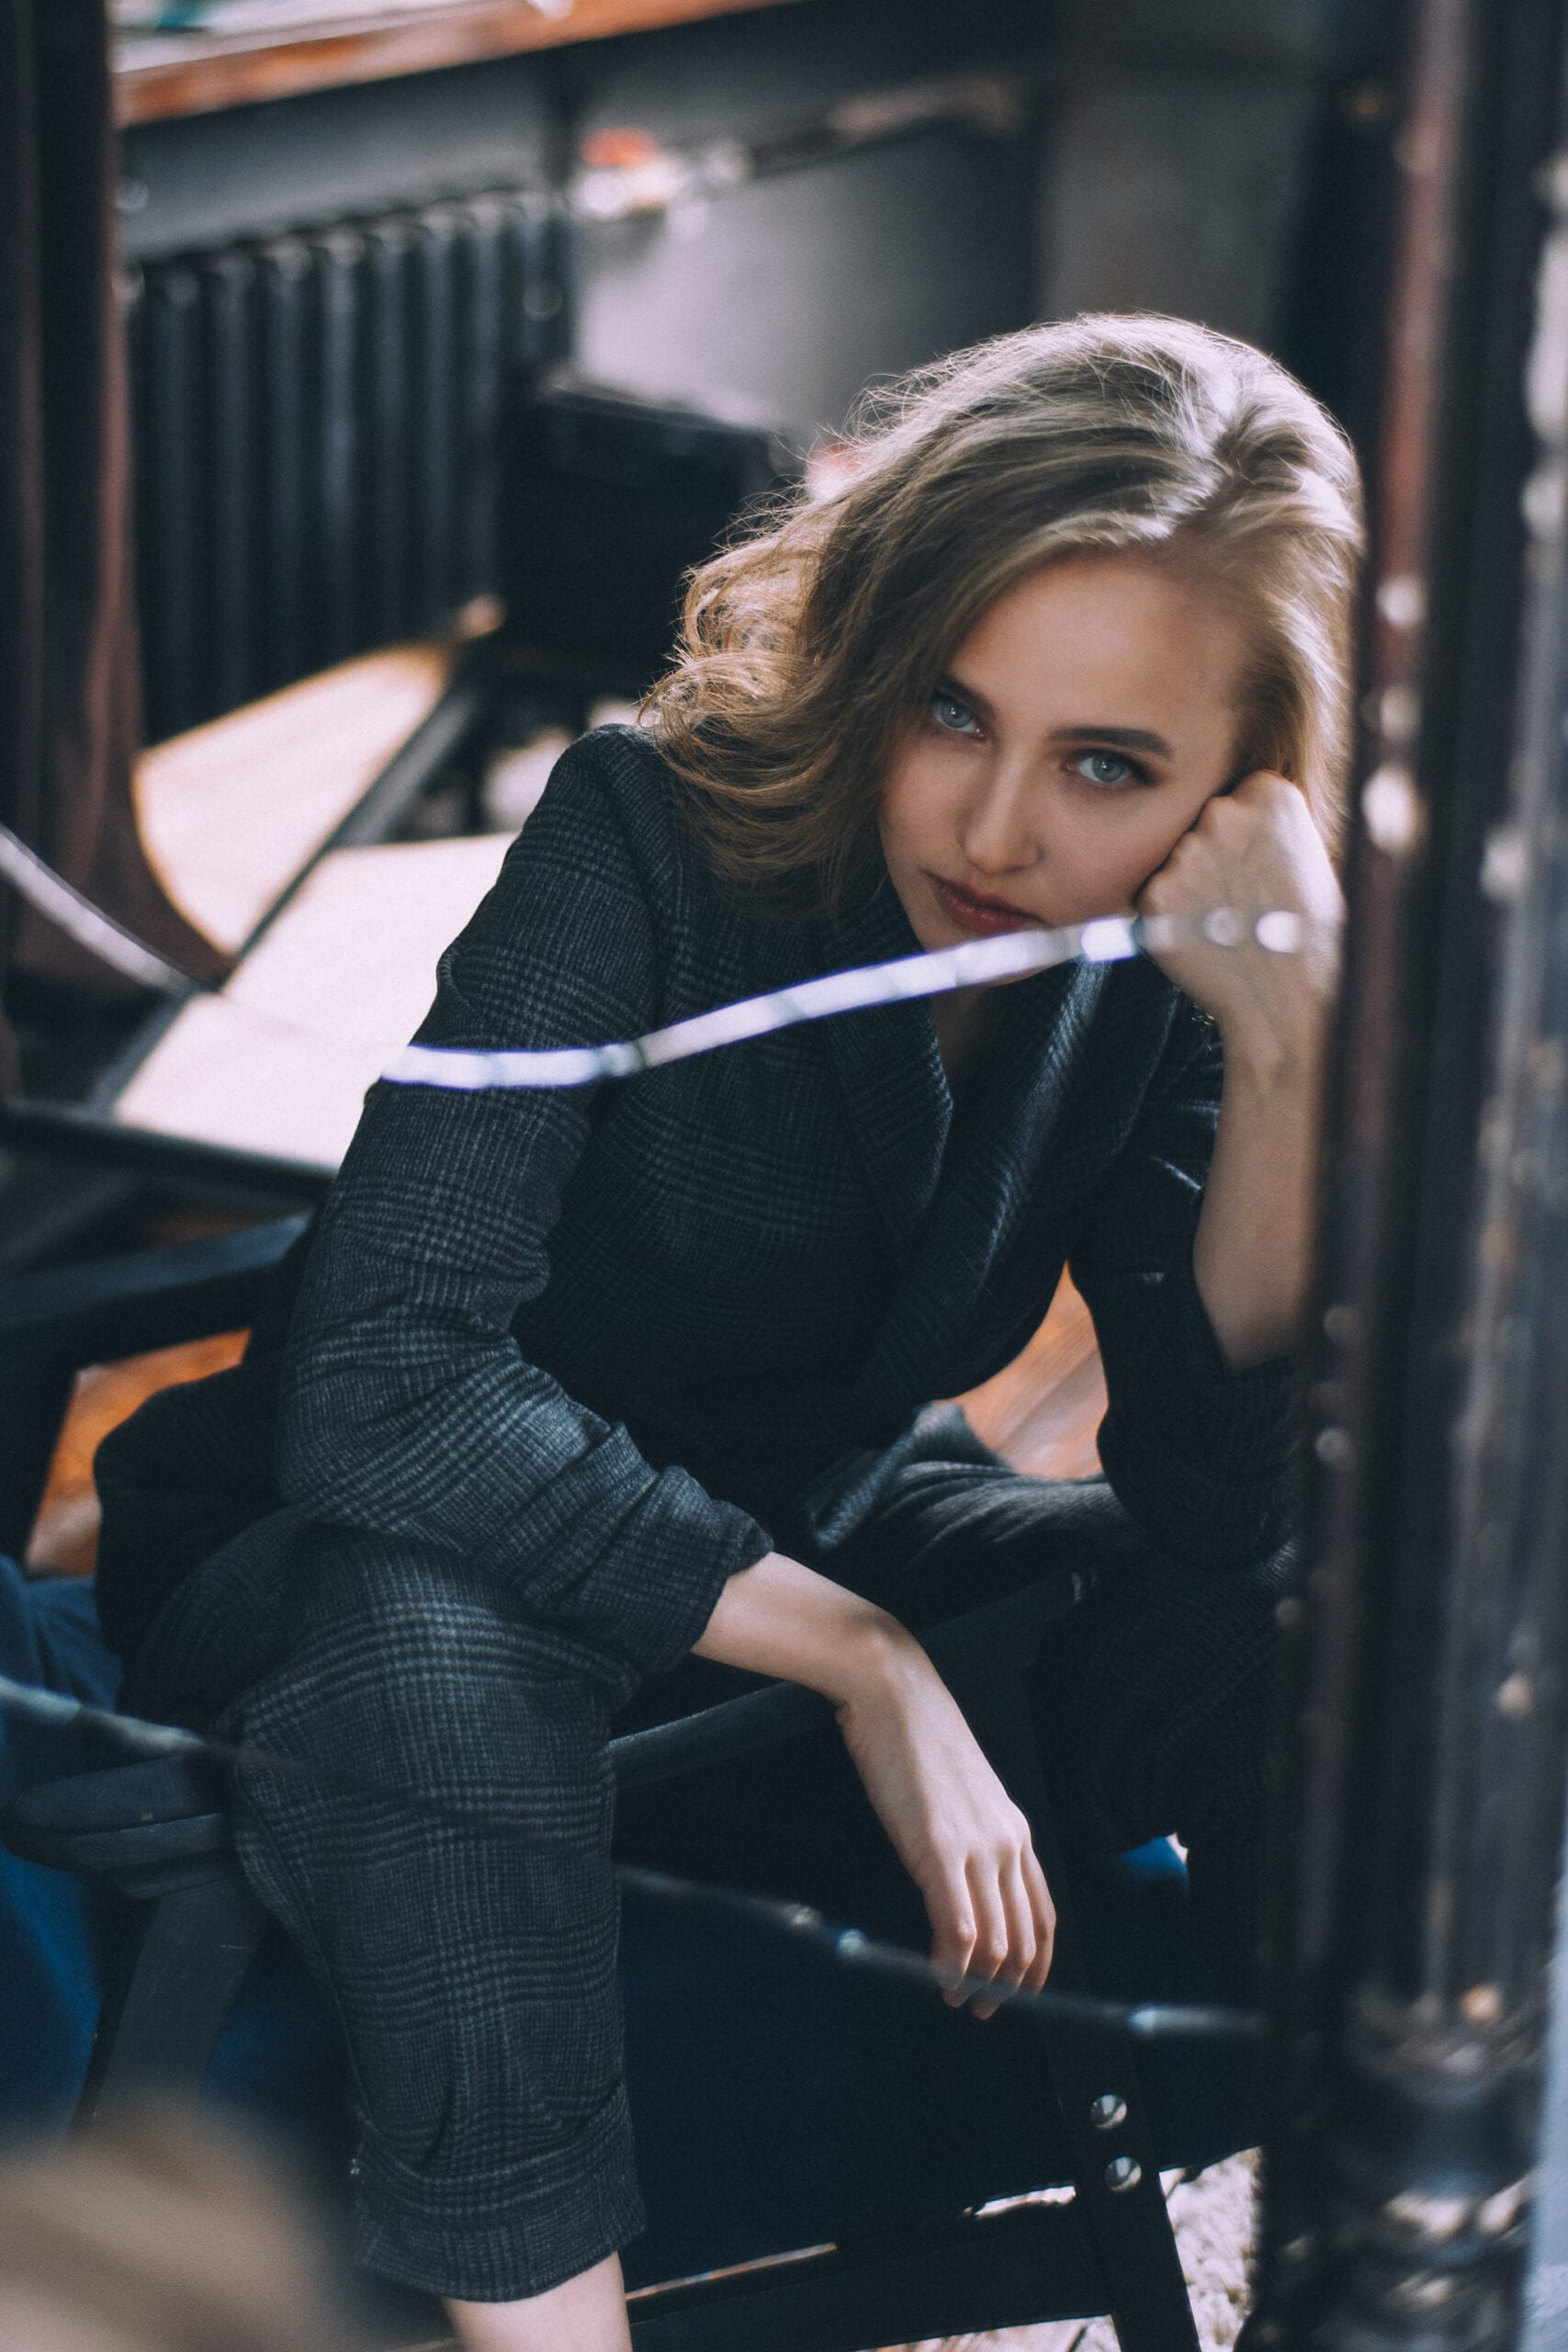 Fashion editorial shot of a woman in a suit